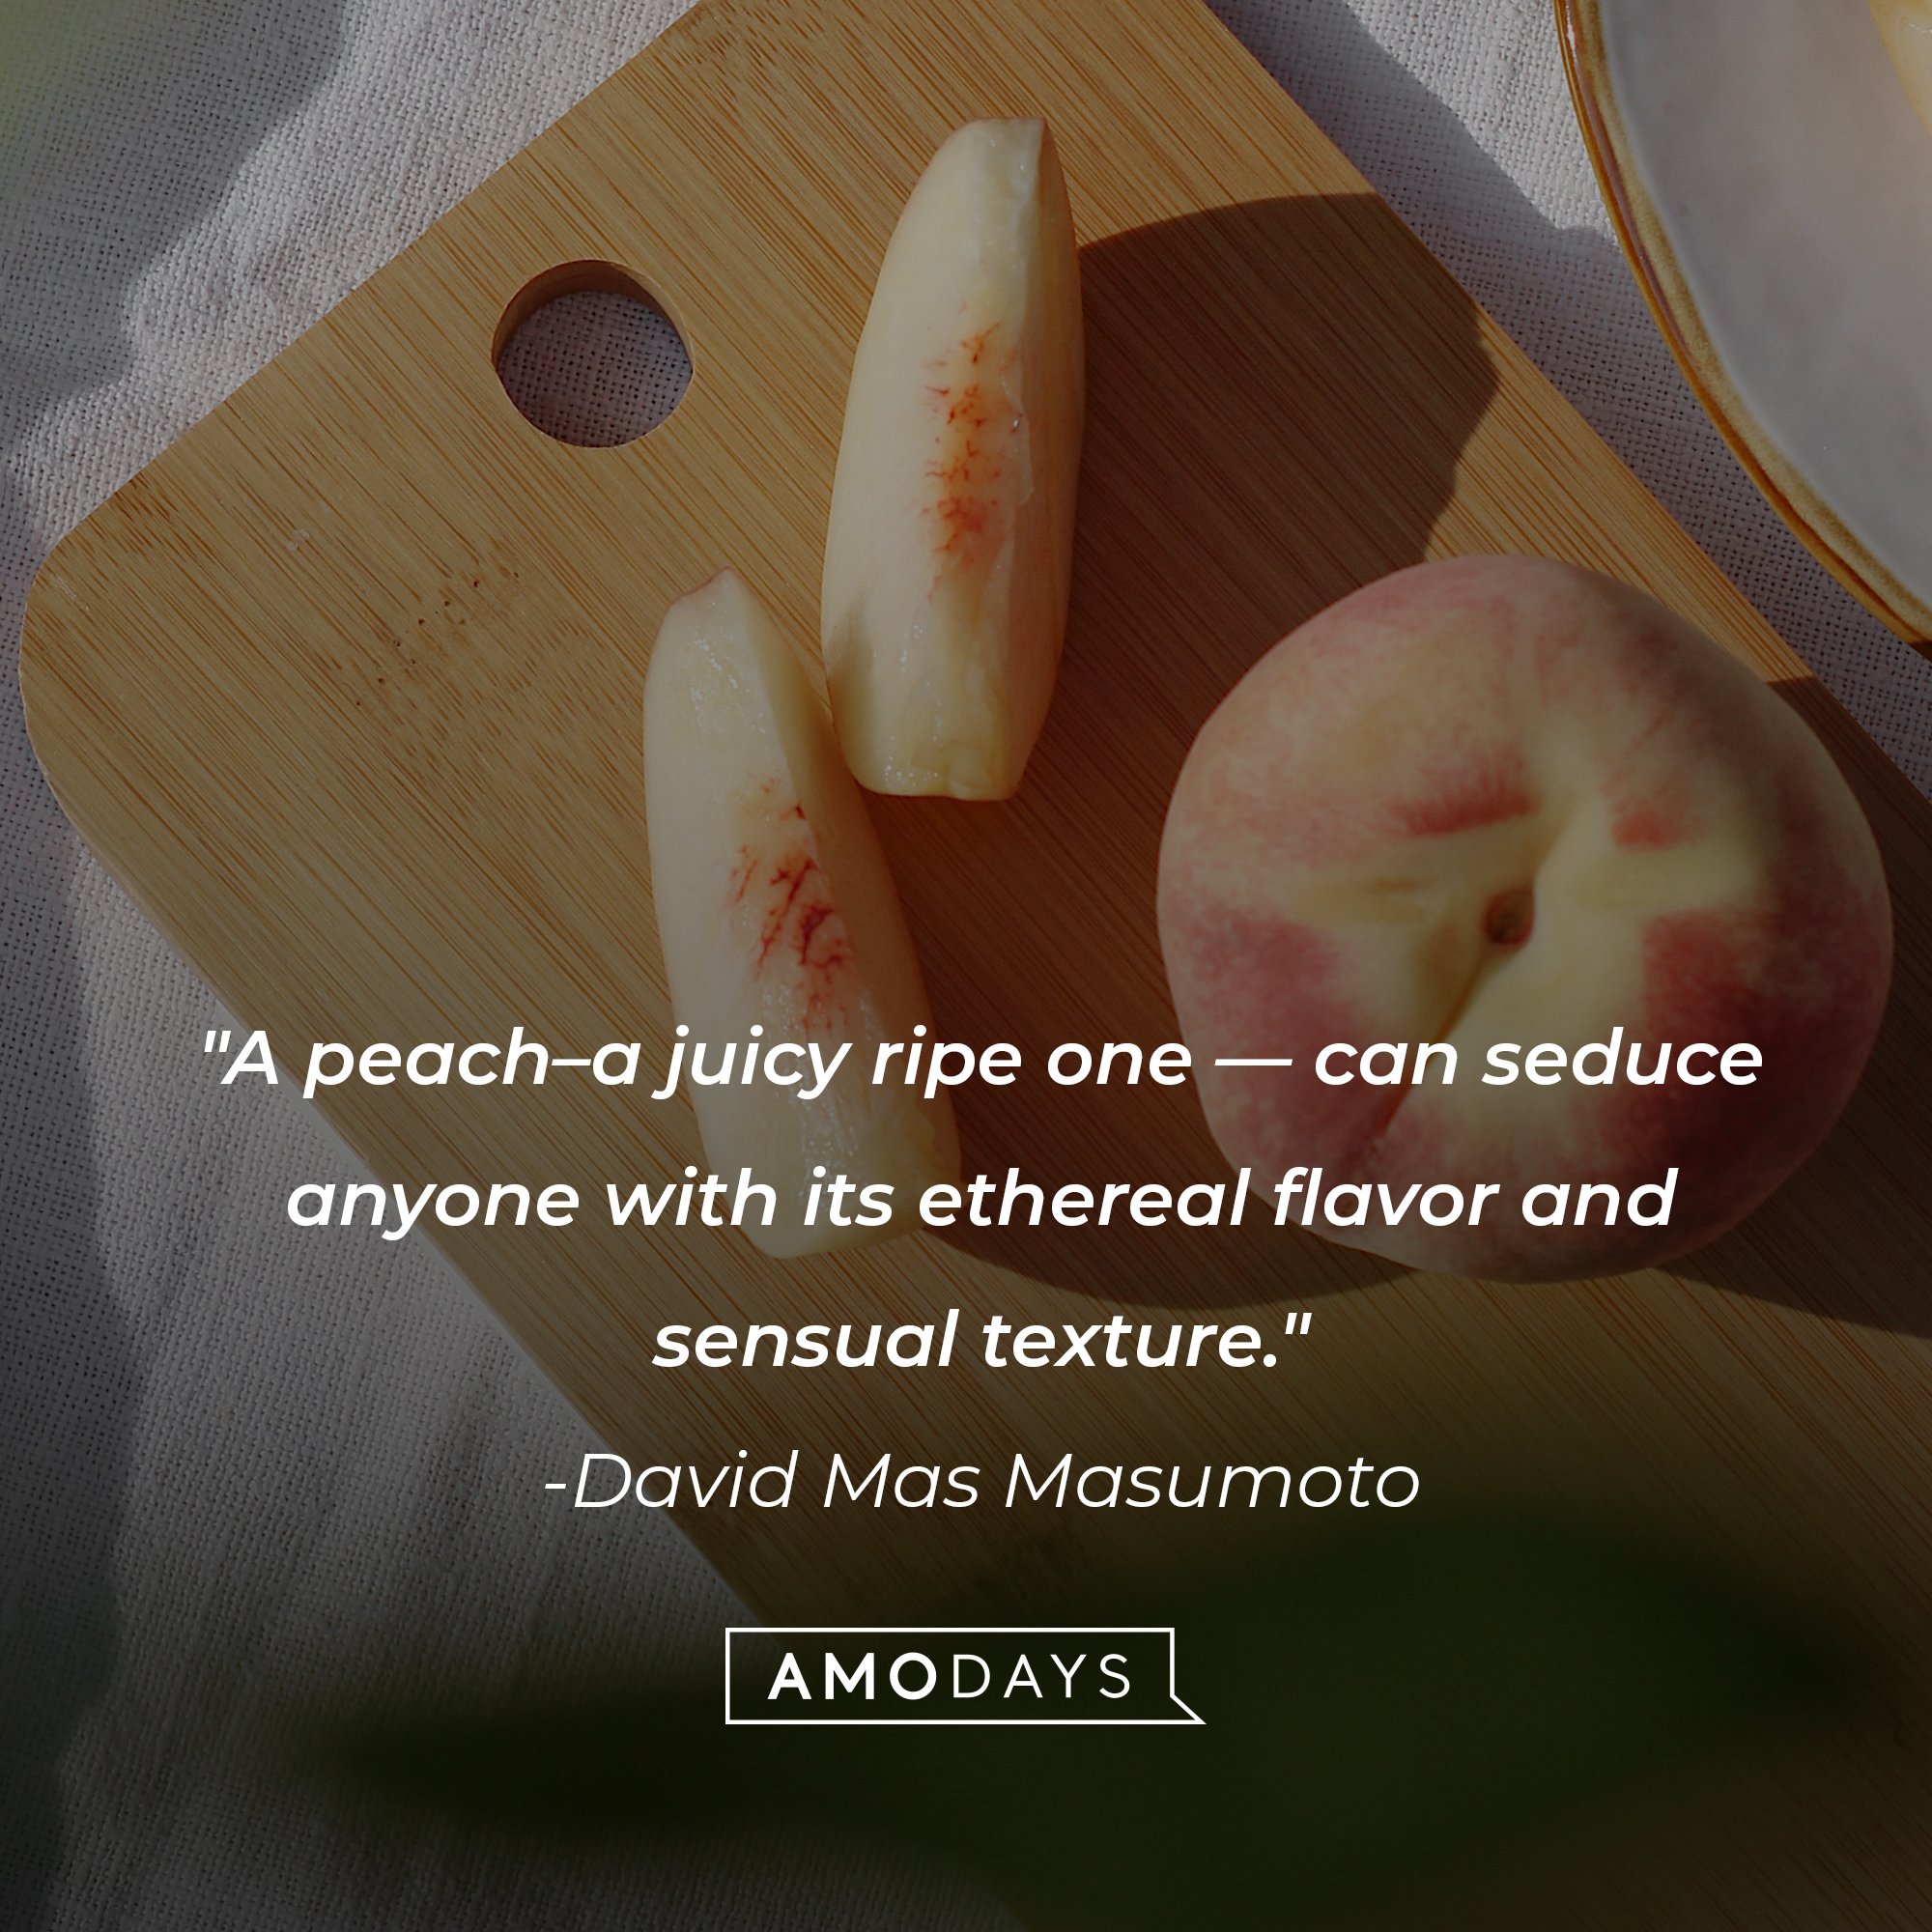 David Mas Masumoto's quote: "A peach–a juicy ripe one–can seduce anyone with its ethereal flavor and sensual texture." | Image: AmoDays